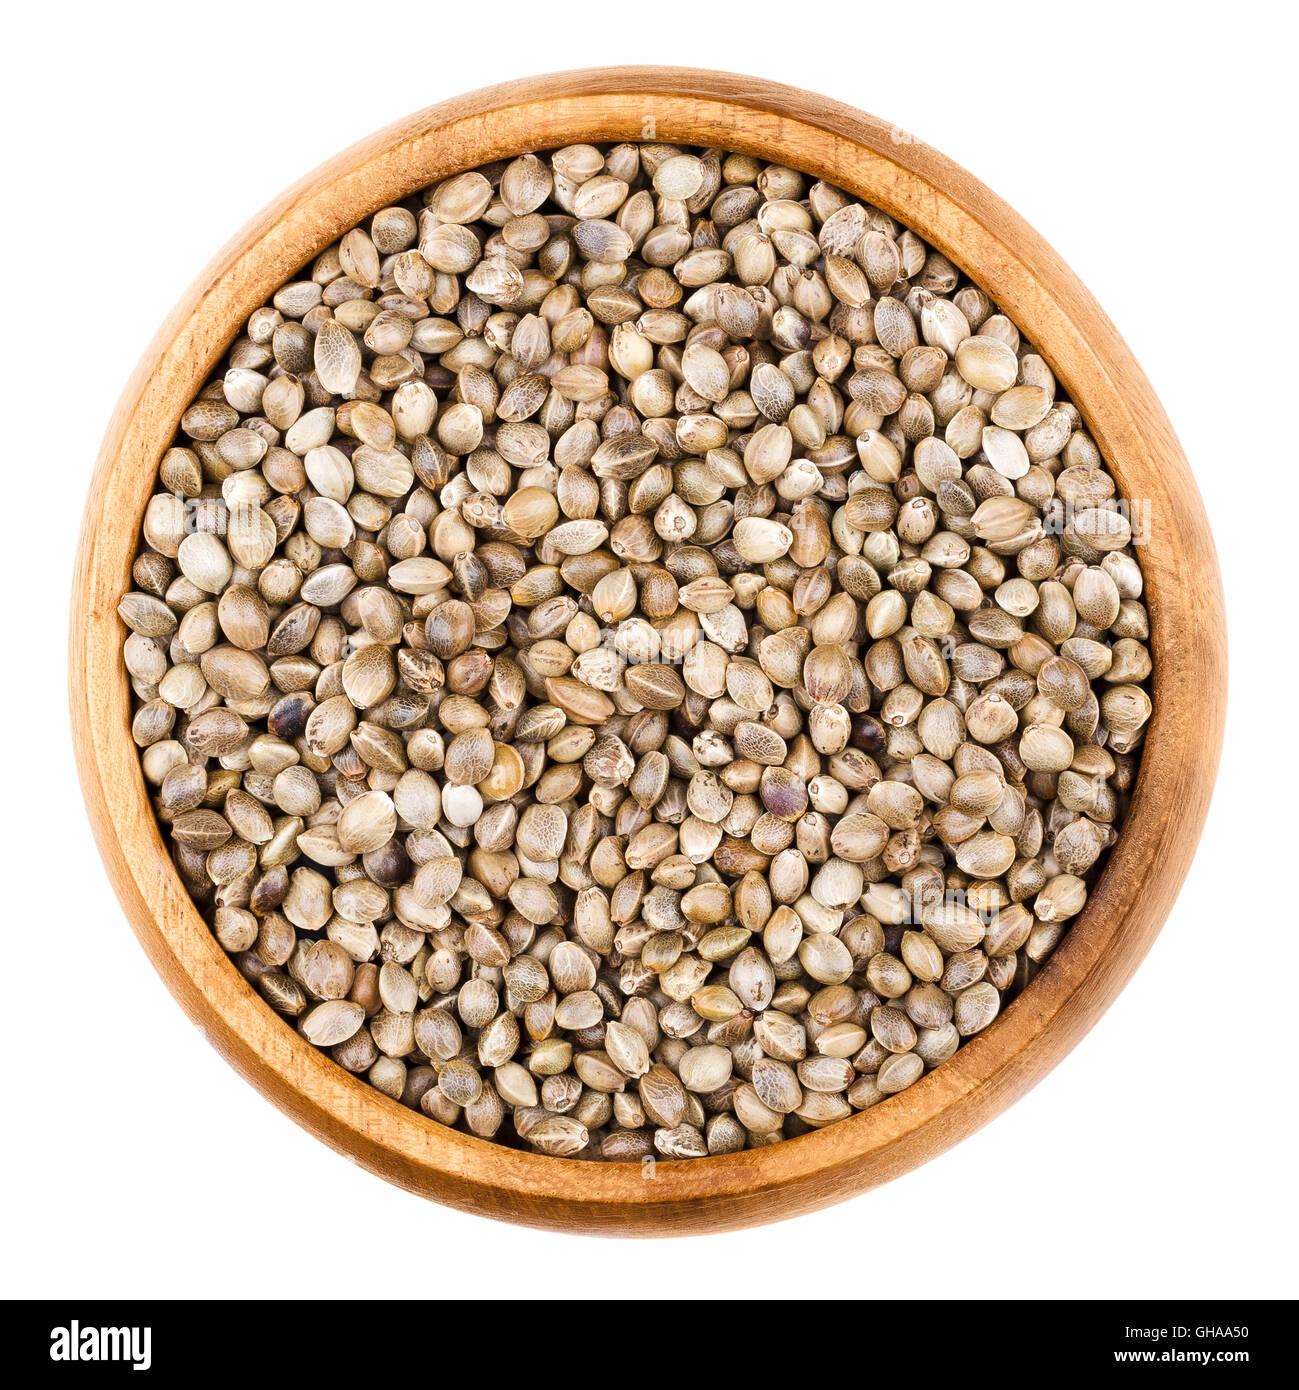 Hemp seeds in a wooden bowl on white background. Unshelled edible raw hempseeds of Cannabis sativa. Isolated close up macro. Stock Photo